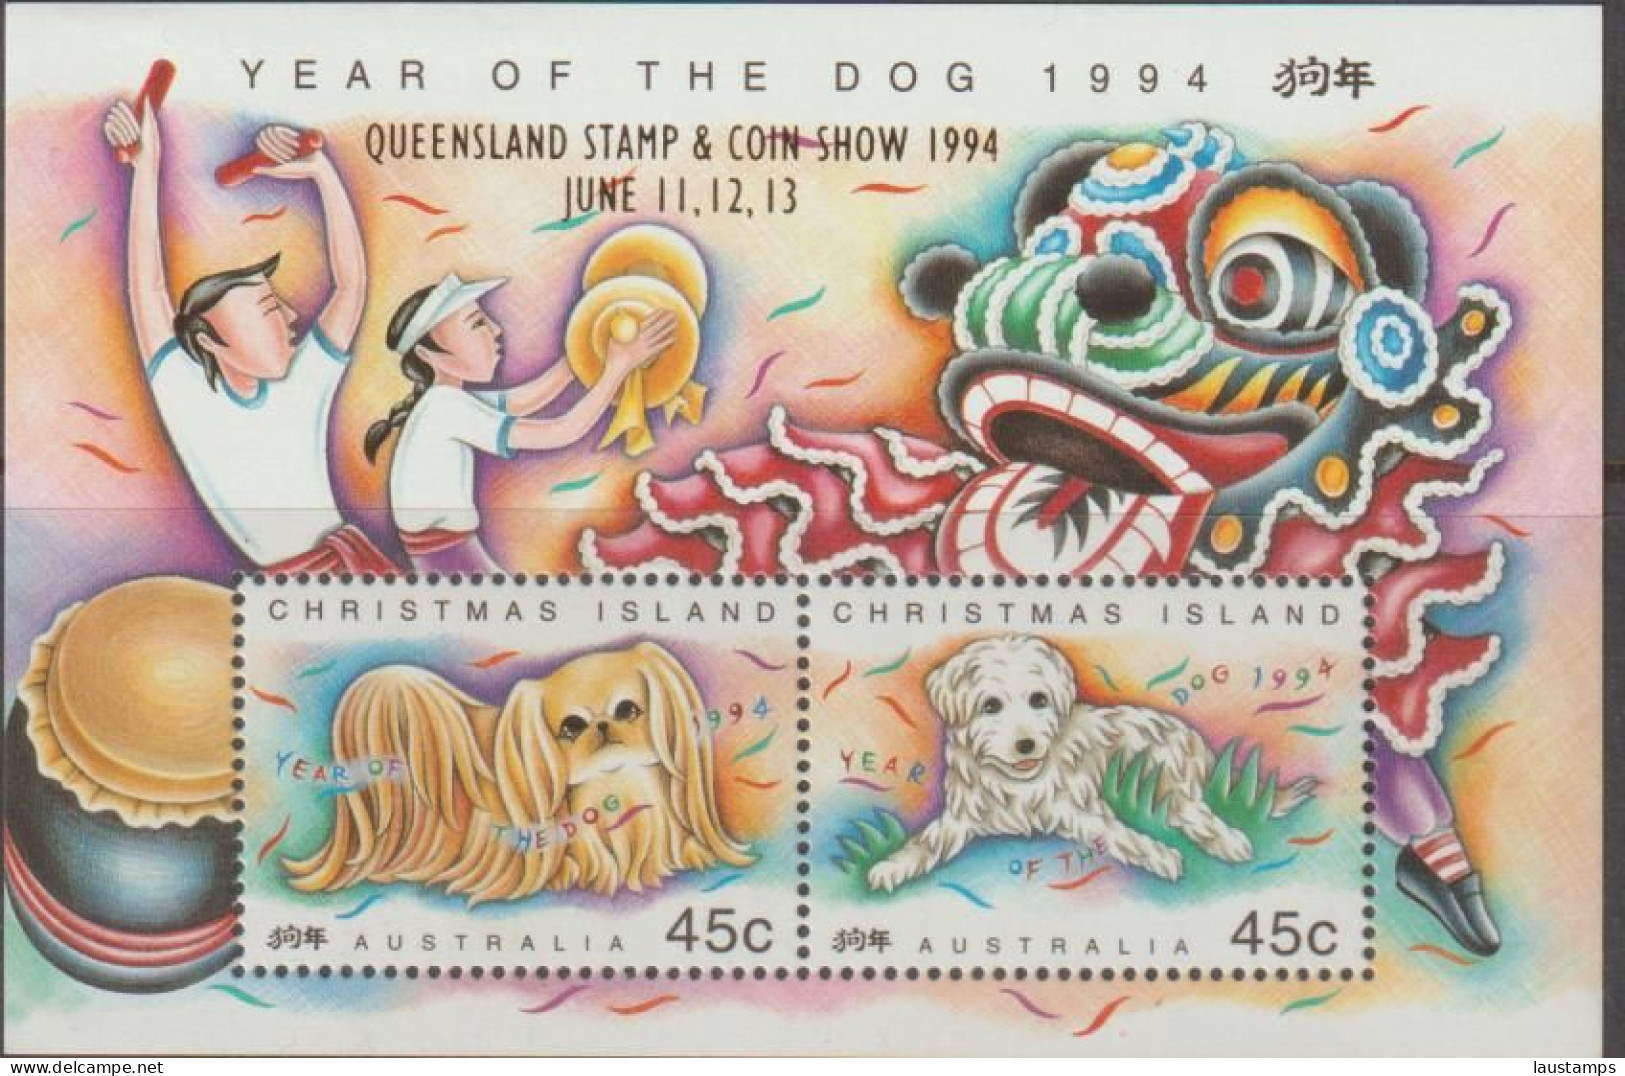 Christmas Island 1994 Year Of The Dog Ovpt Queensland Stamp & Coin Show S/S MNH - Chinese New Year